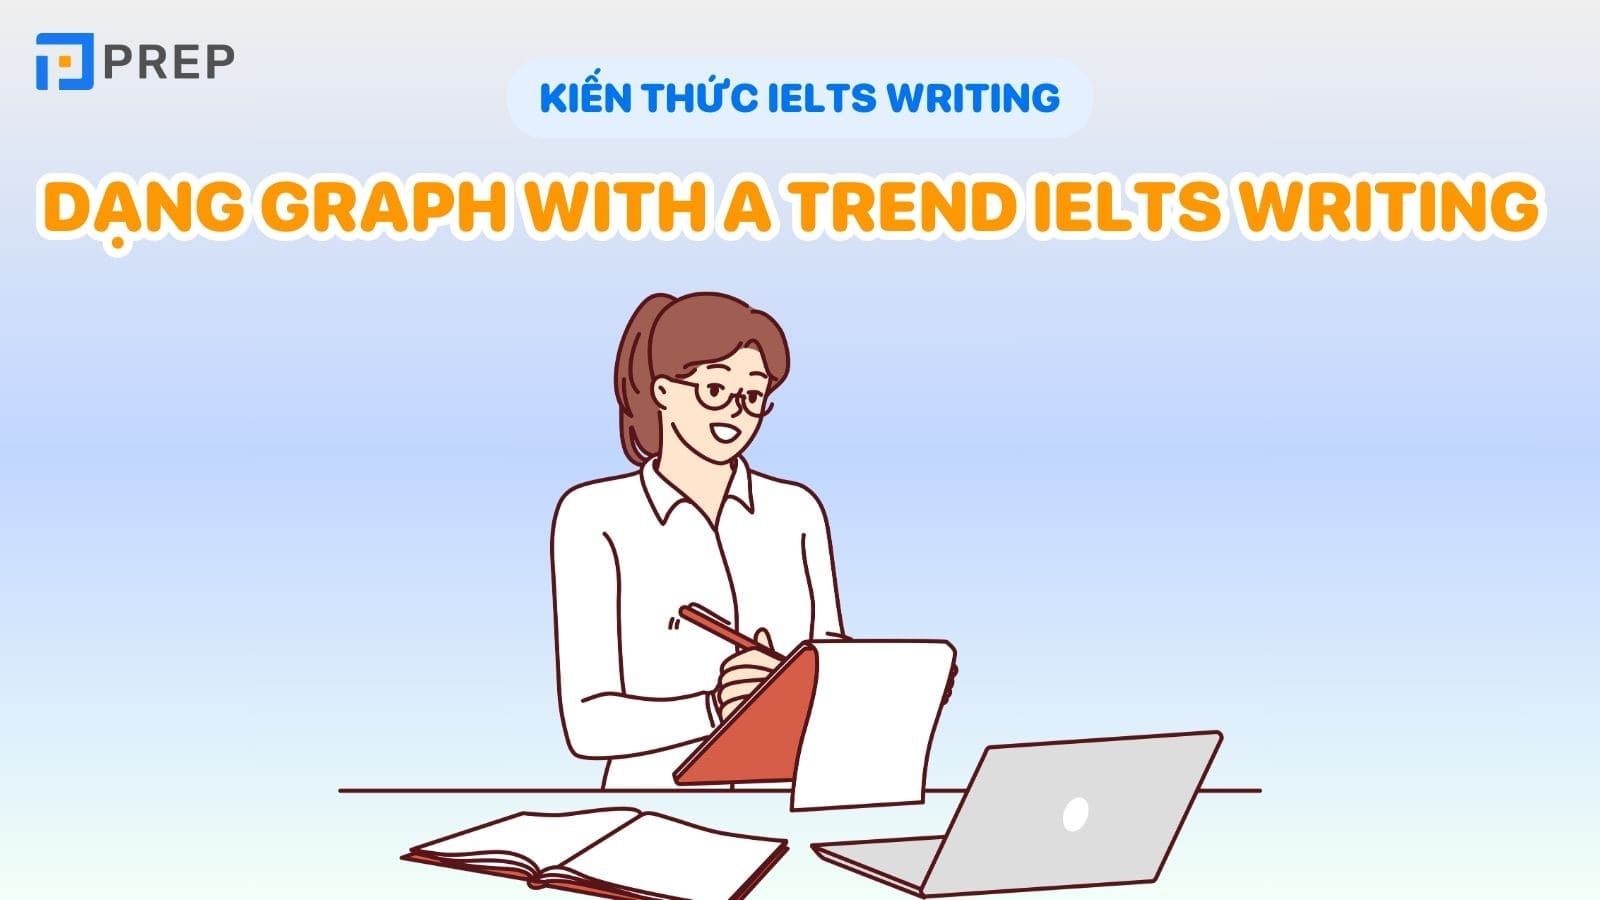 dang-graph-with-a-trend-ielts-writing.jpg